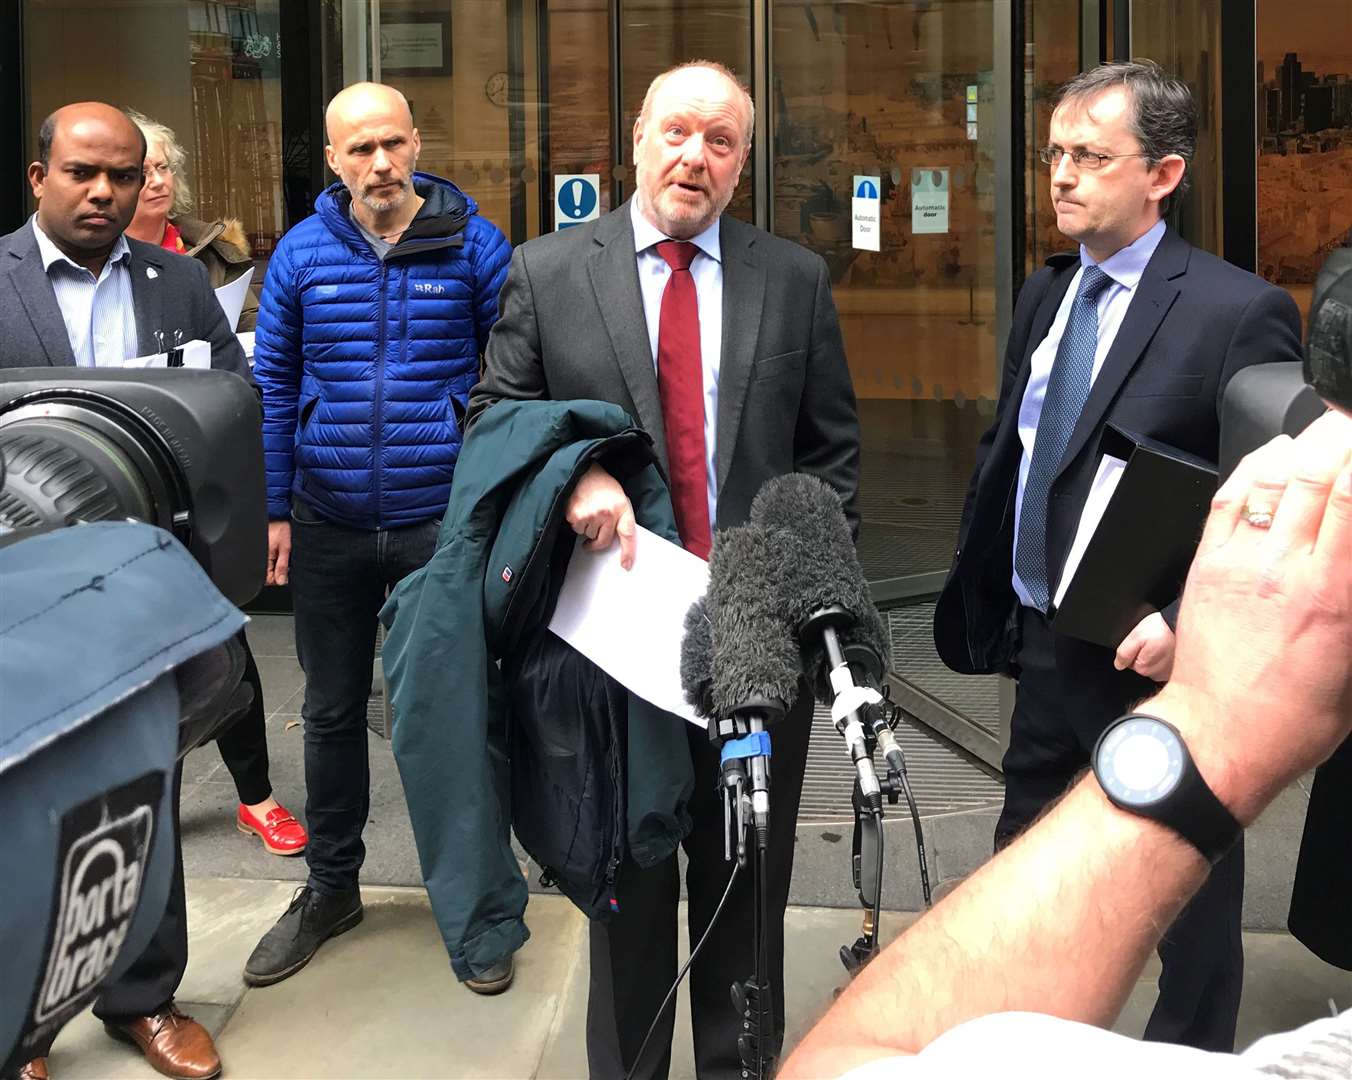 Alan Bates (centre) speaking outside the High Court in London, after the first judgment was handed down in claims against the Post Office over its computer system (Sam Tobin/PA)